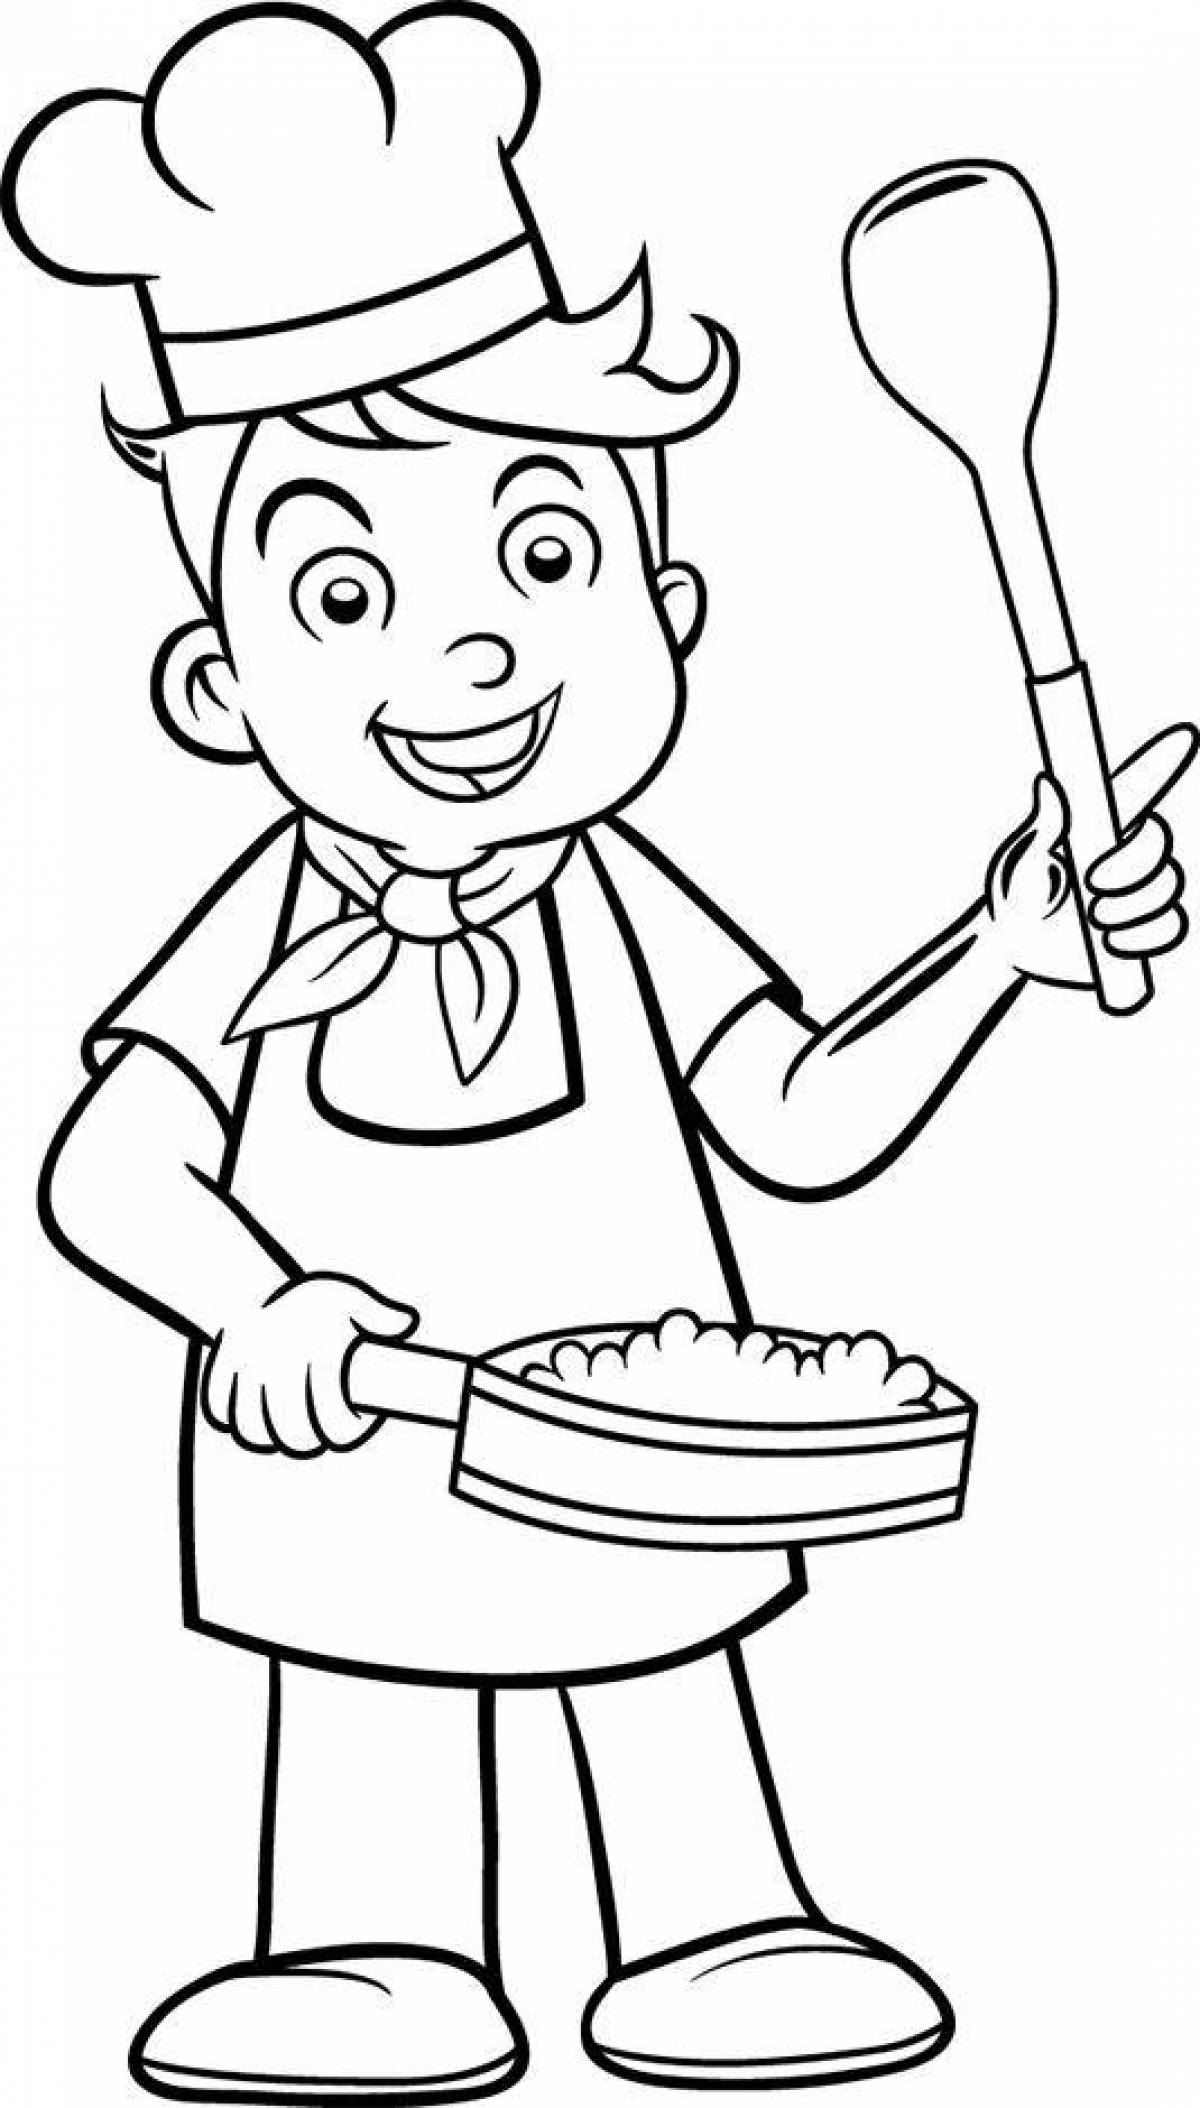 Cook's exciting coloring book